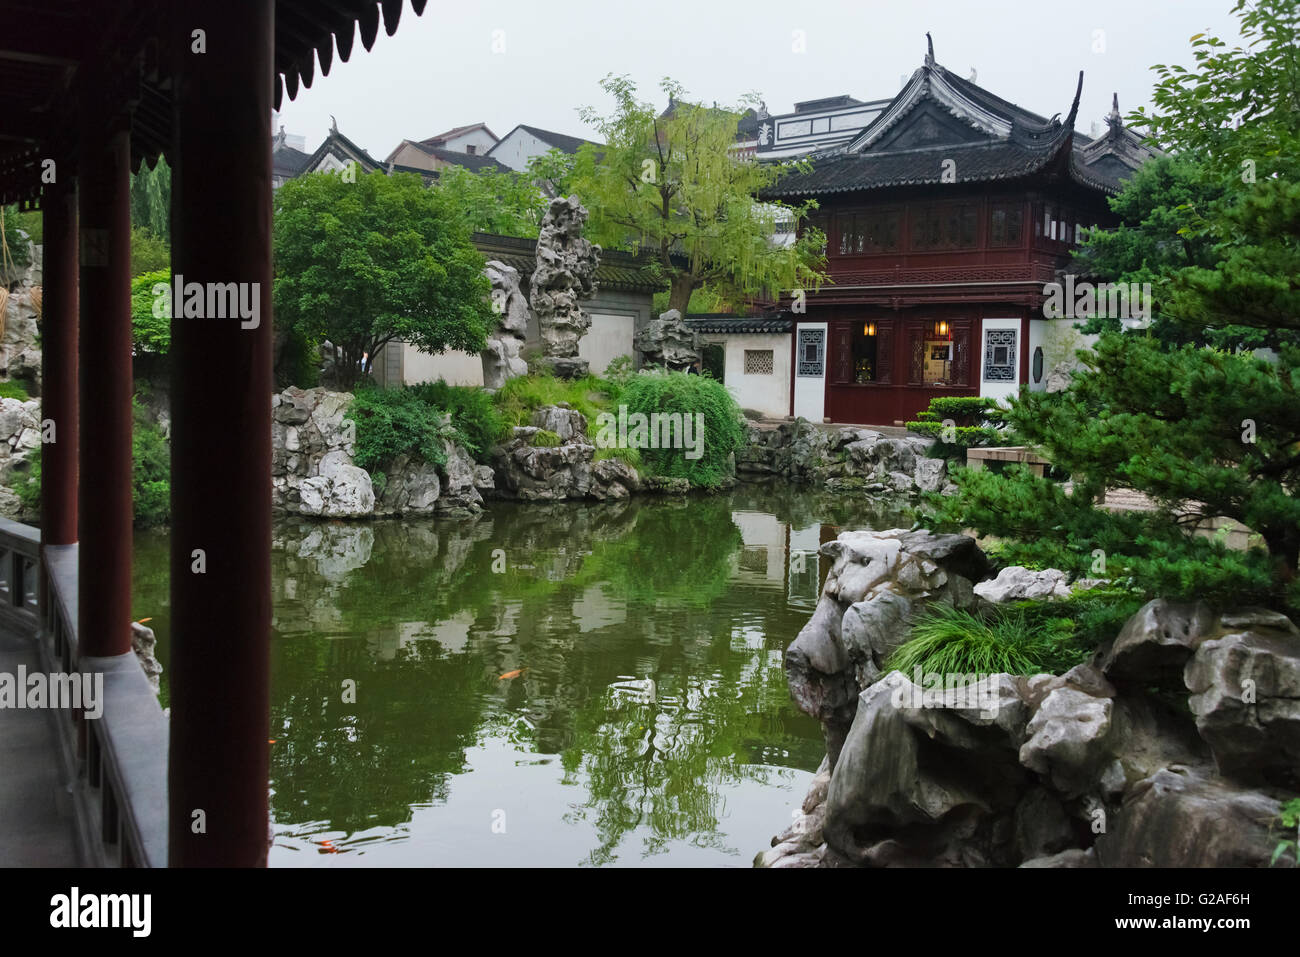 Pavilion with pond in Yuyuan Garden, Shanghai, China Stock Photo